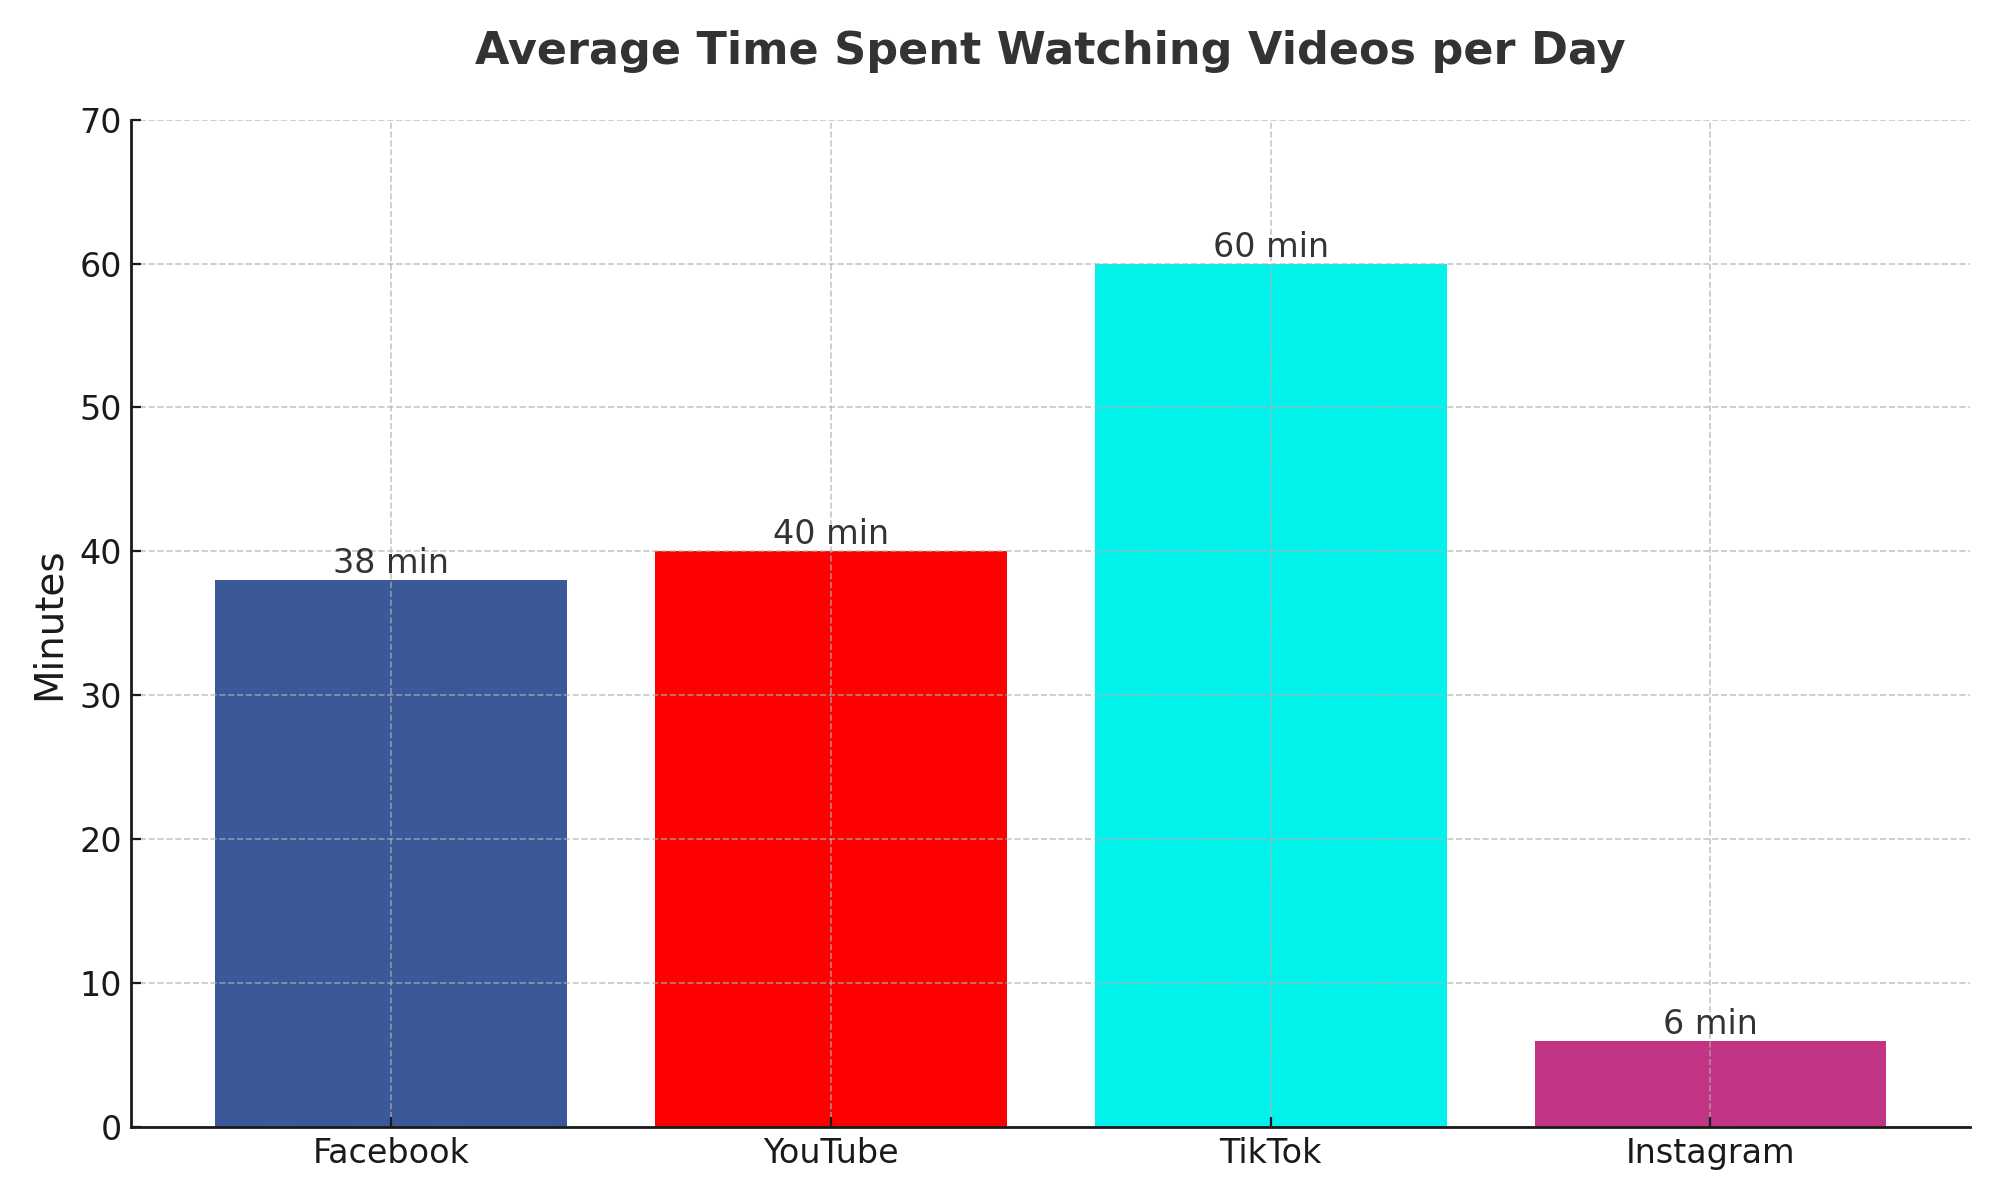 Video_Watching_Time_Comparison_Bar_Chart-Fb vs other